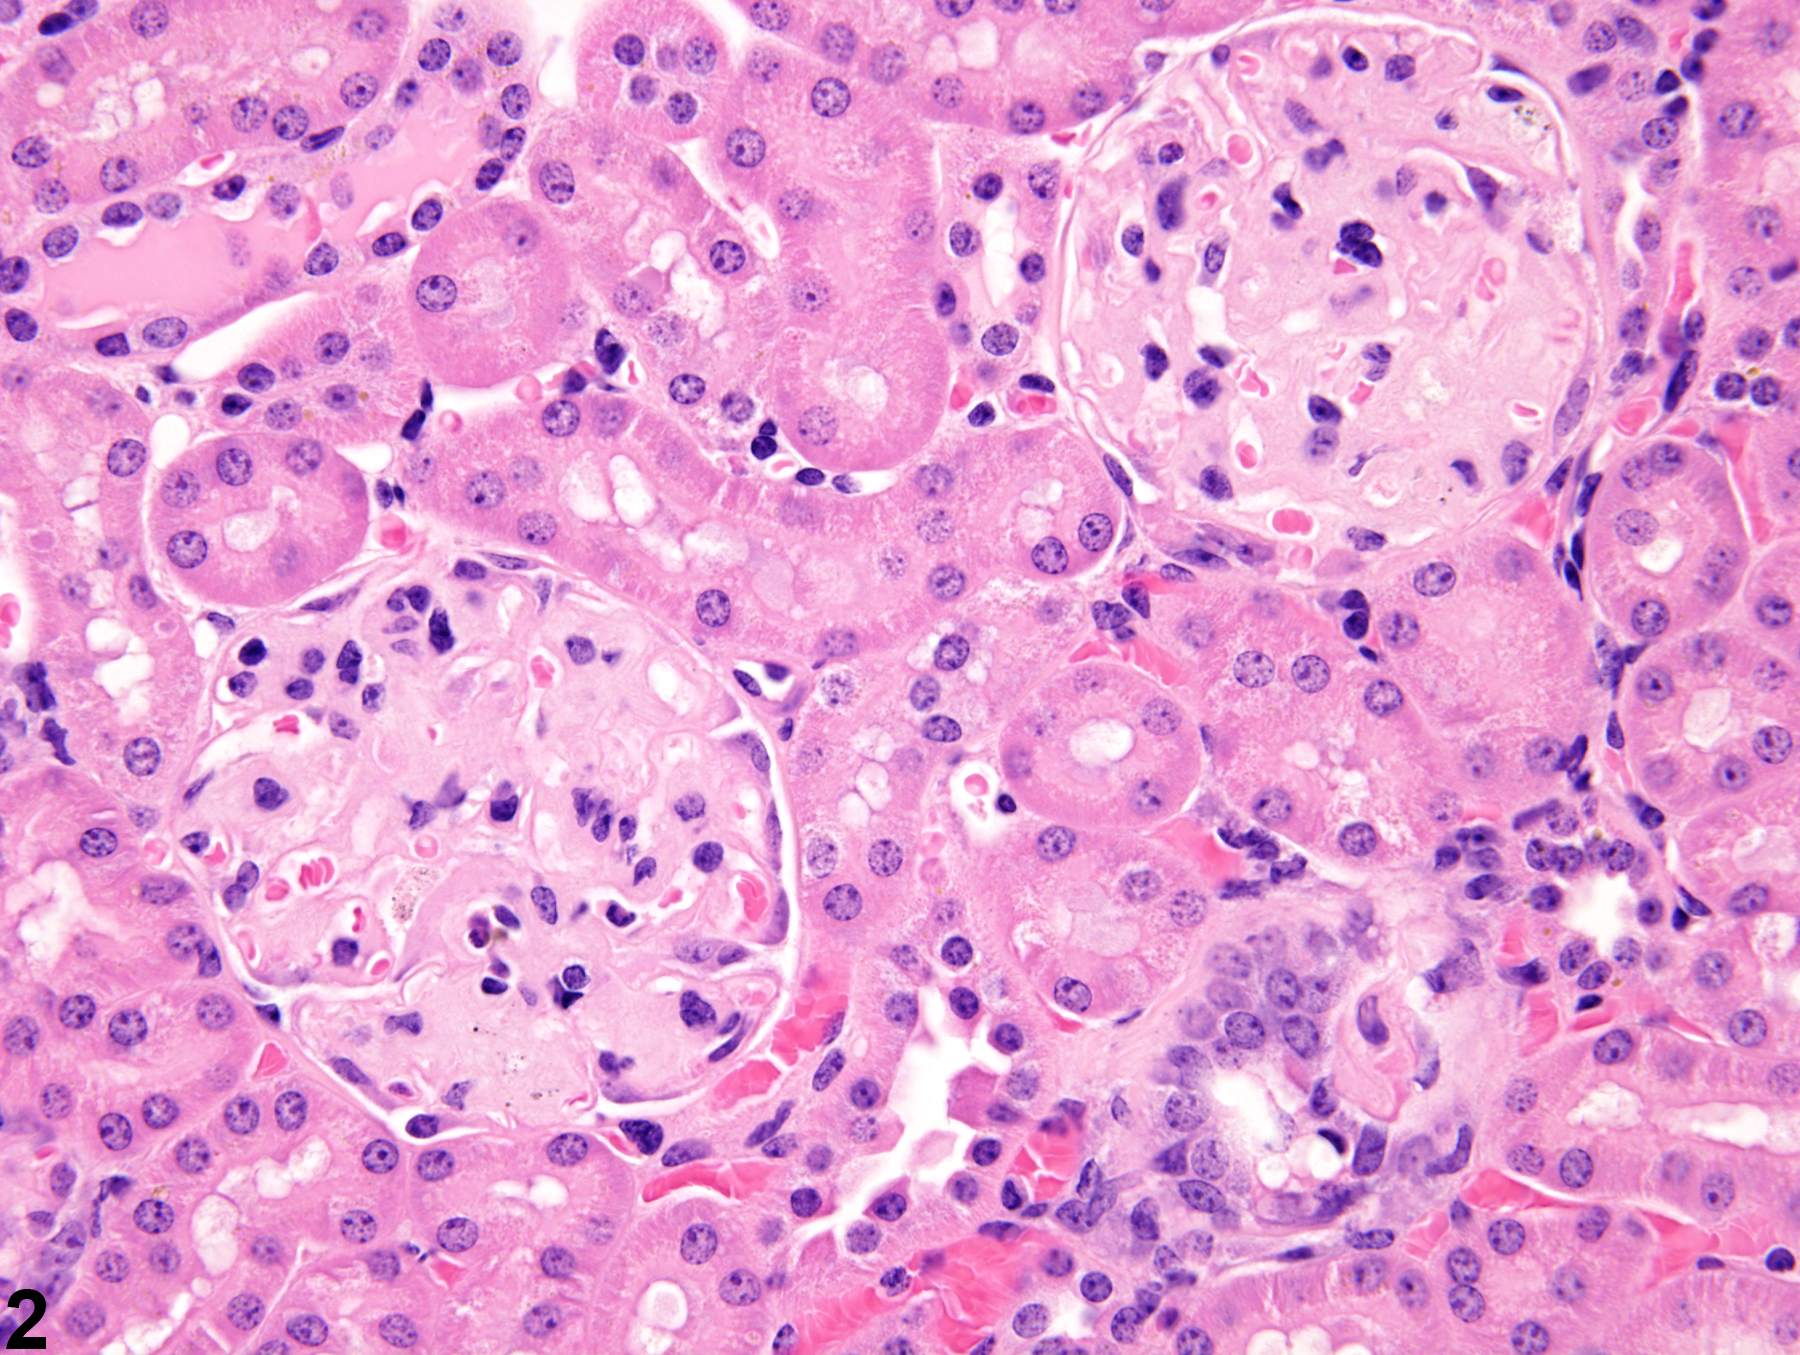 Image of amyloid in the kidney from a female B6C3F1 mouse in a chronic study